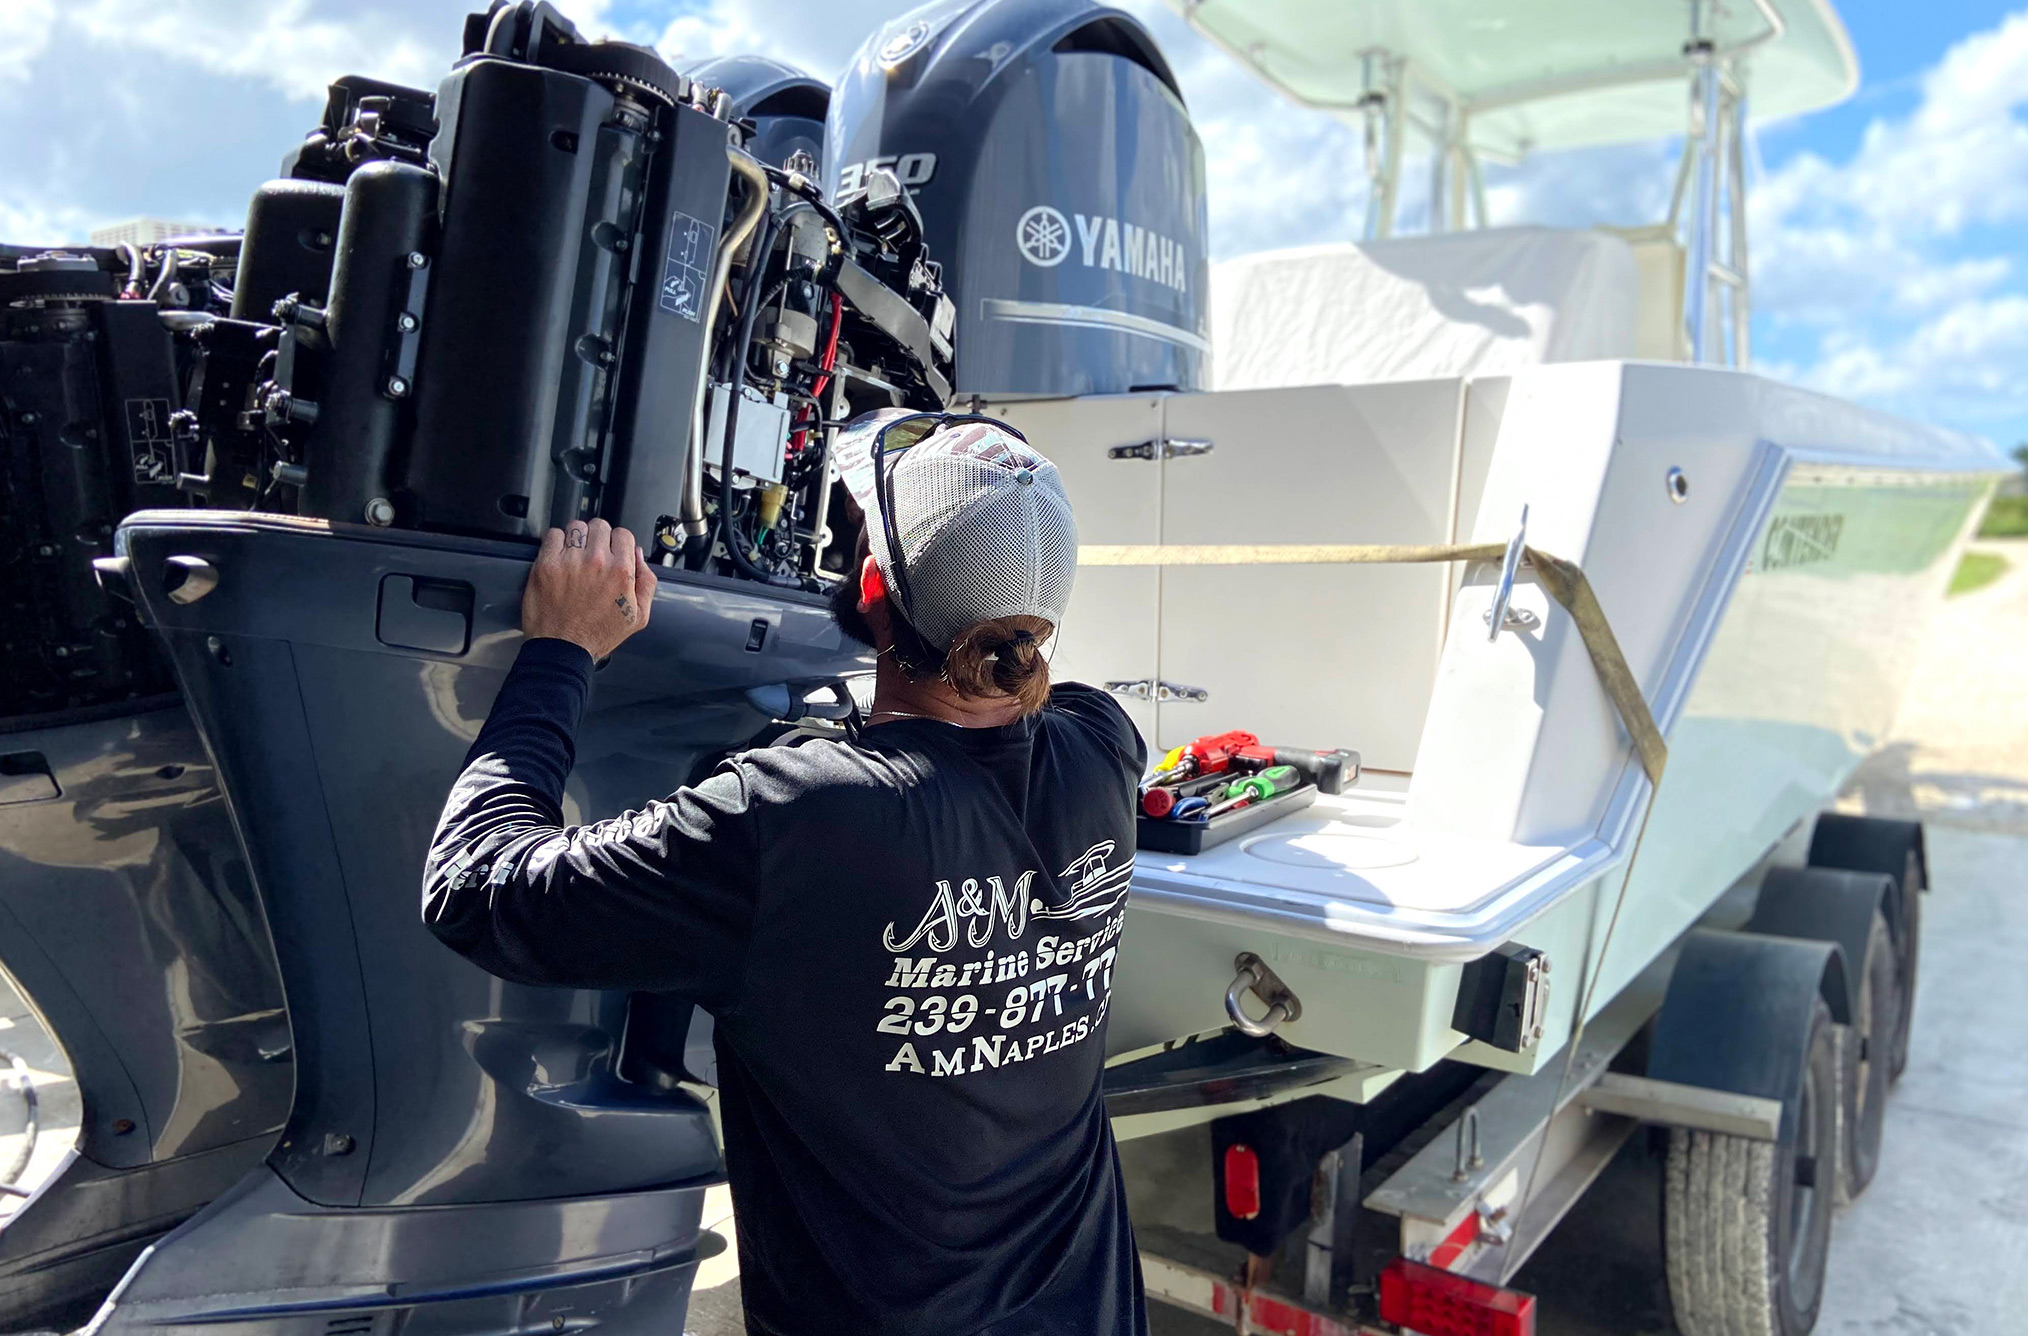 A&M Marine employee working on an outboard motor